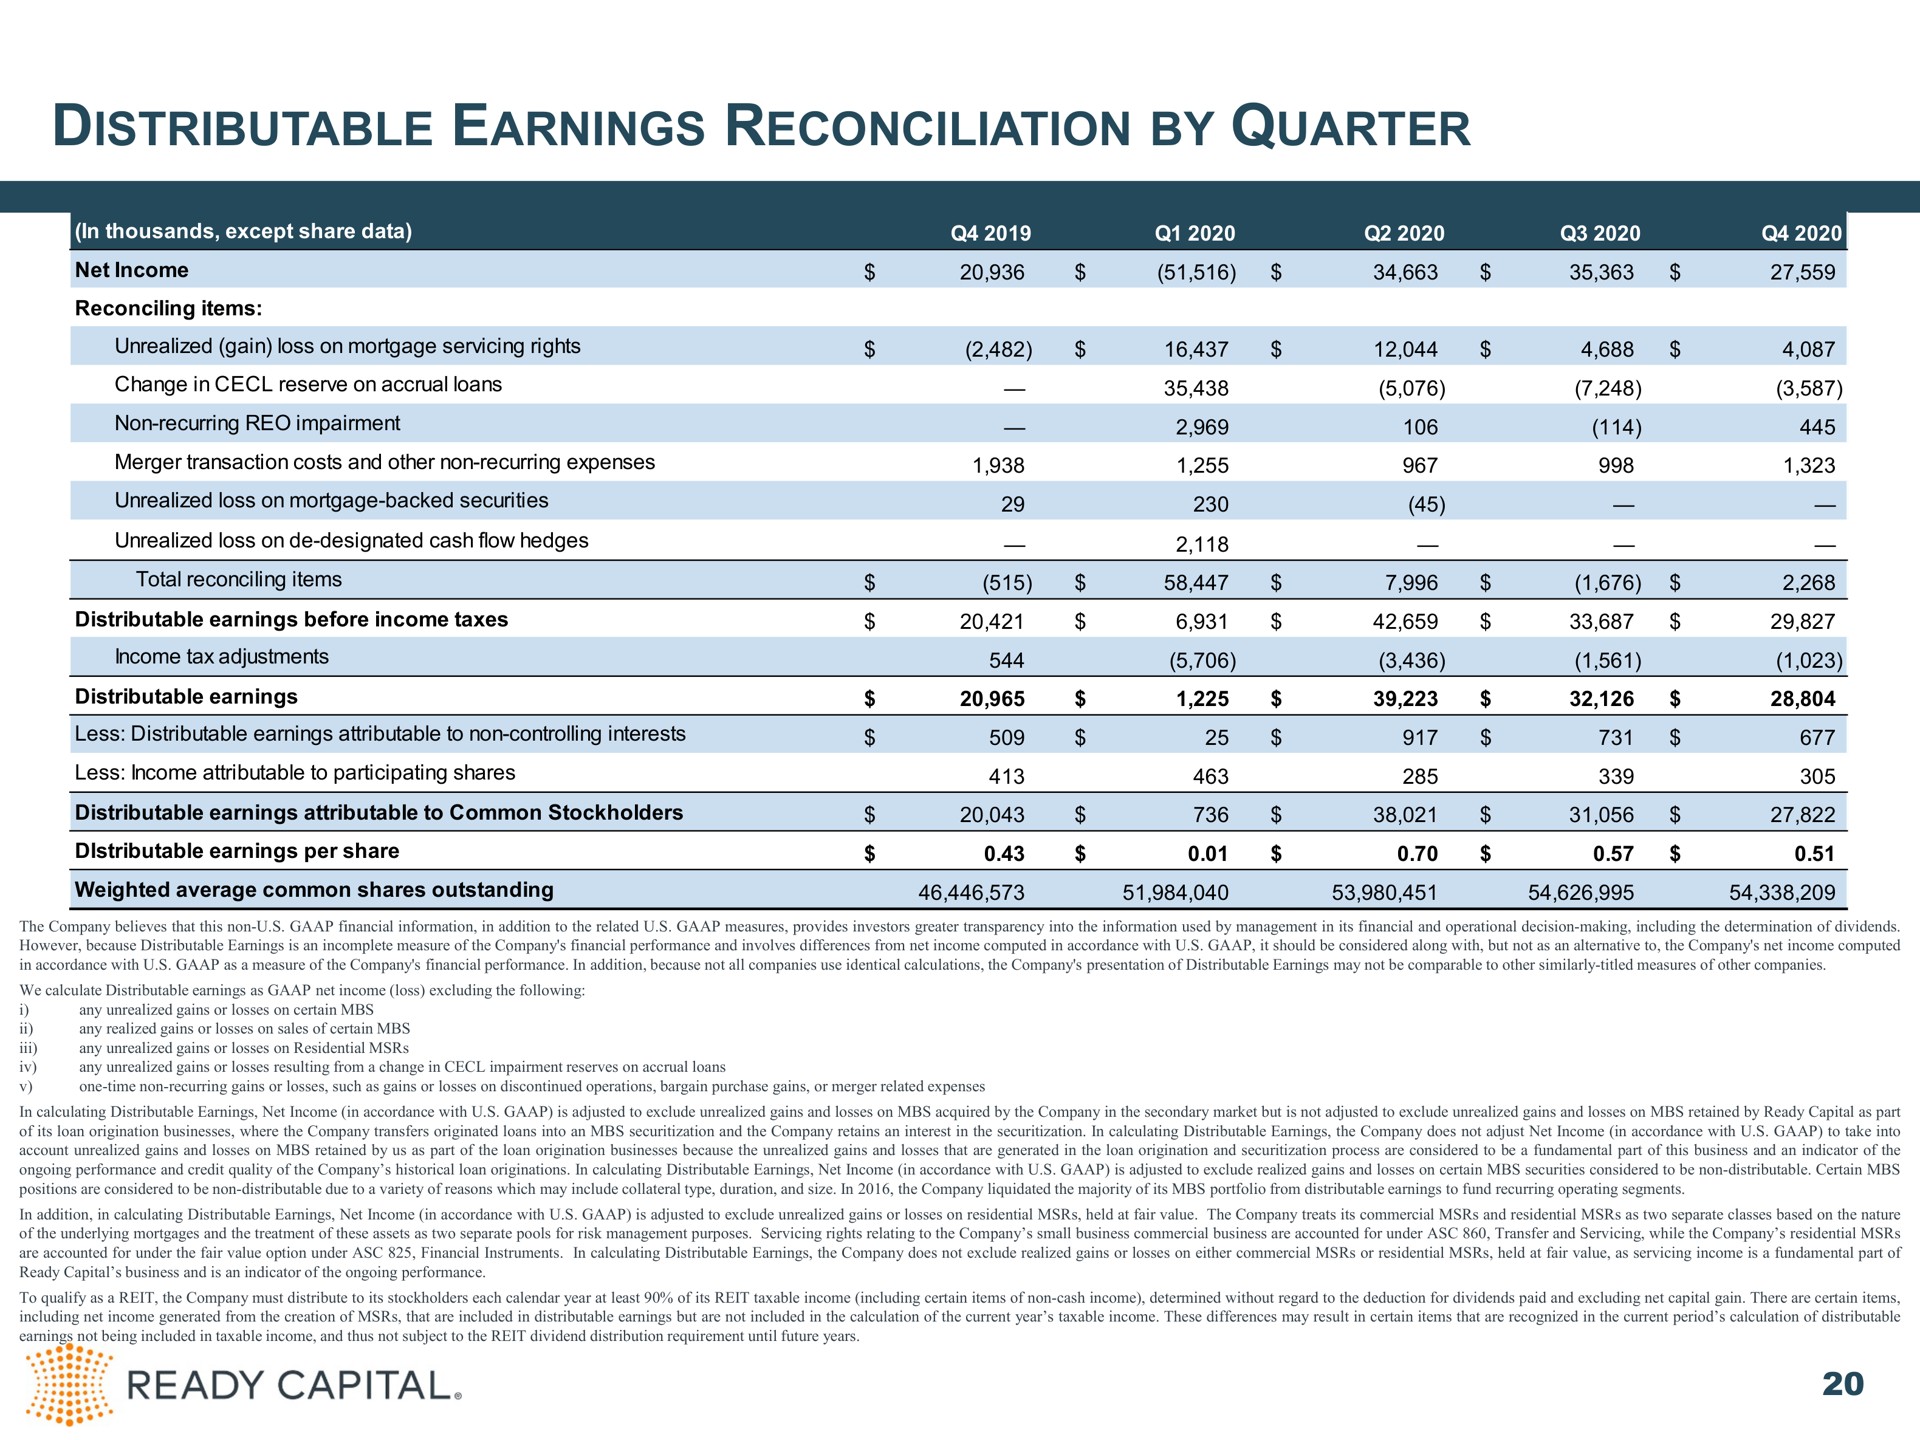 distributable earnings reconciliation by quarter ready capital | Ready Capital